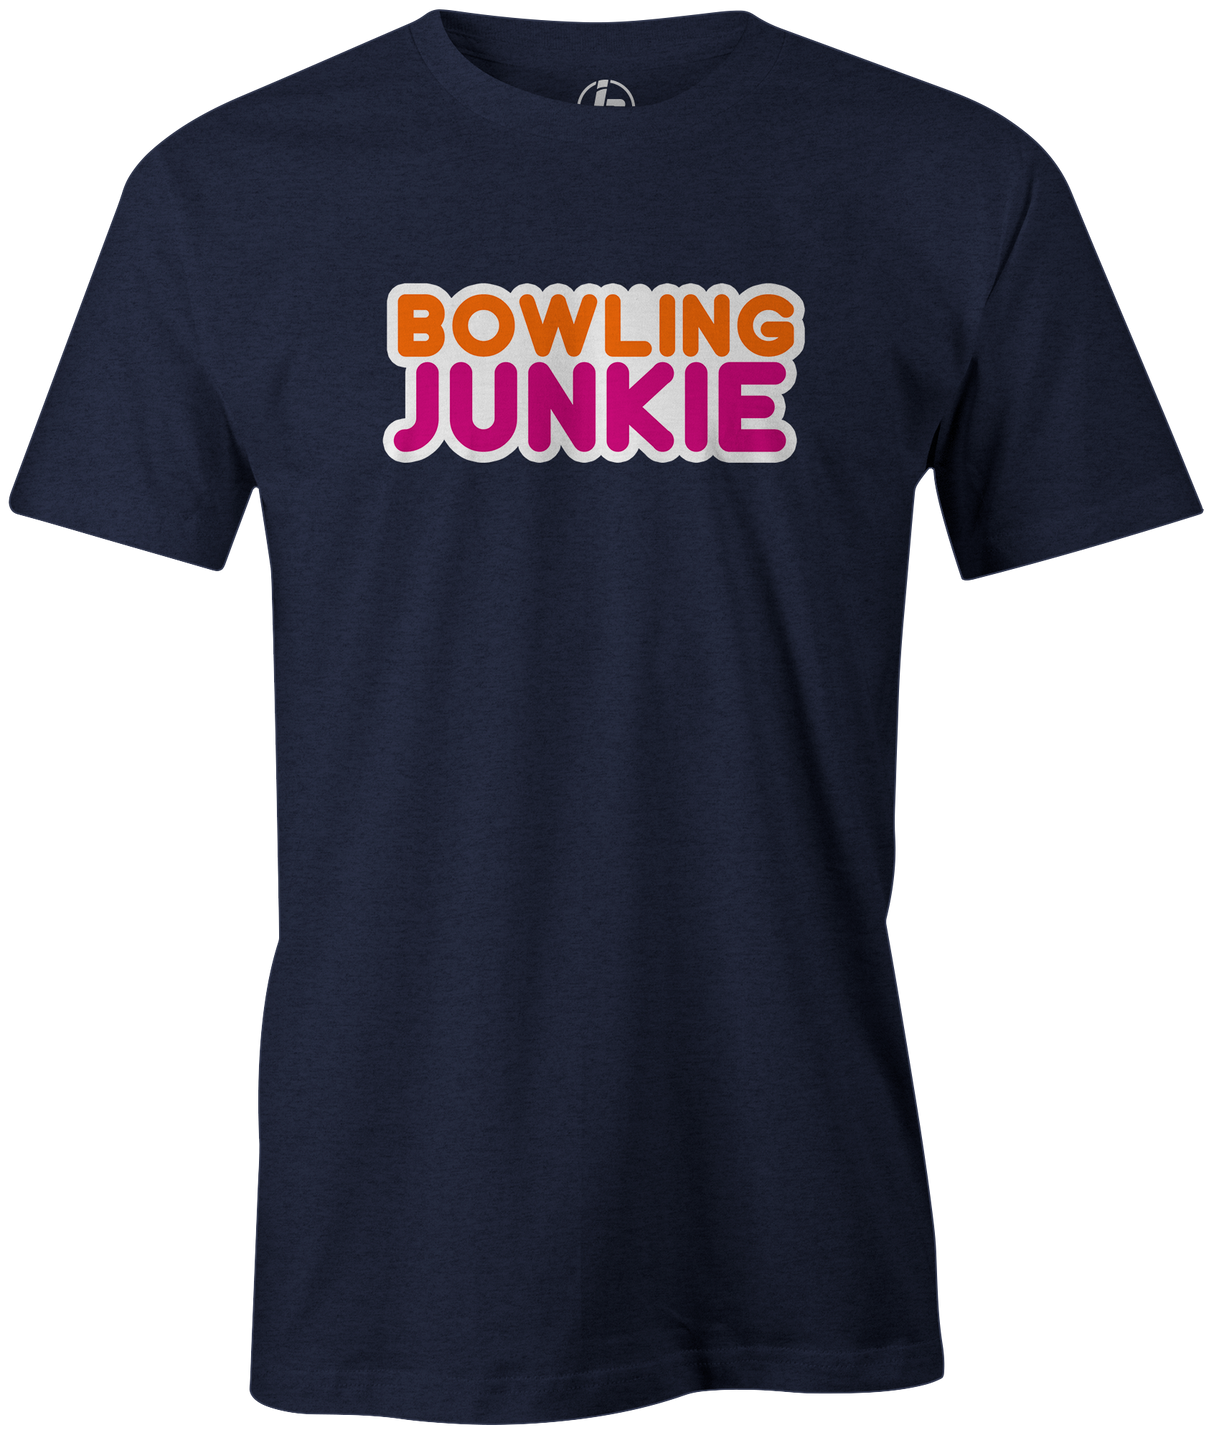 Bowling Junkie It's addicting and you don't care who knows you love bowling! Dunkin Donuts and coffee Gather up your friends, snag this cool t-shirt and hit the lanes for a fun night out! This shirt is also the perfect gift for anyone who loves to bowl! League bowling tshirt, Team shirt, T-shirt, tee-shirt, tshirt. Novelty. Funny t-shirt. Navy